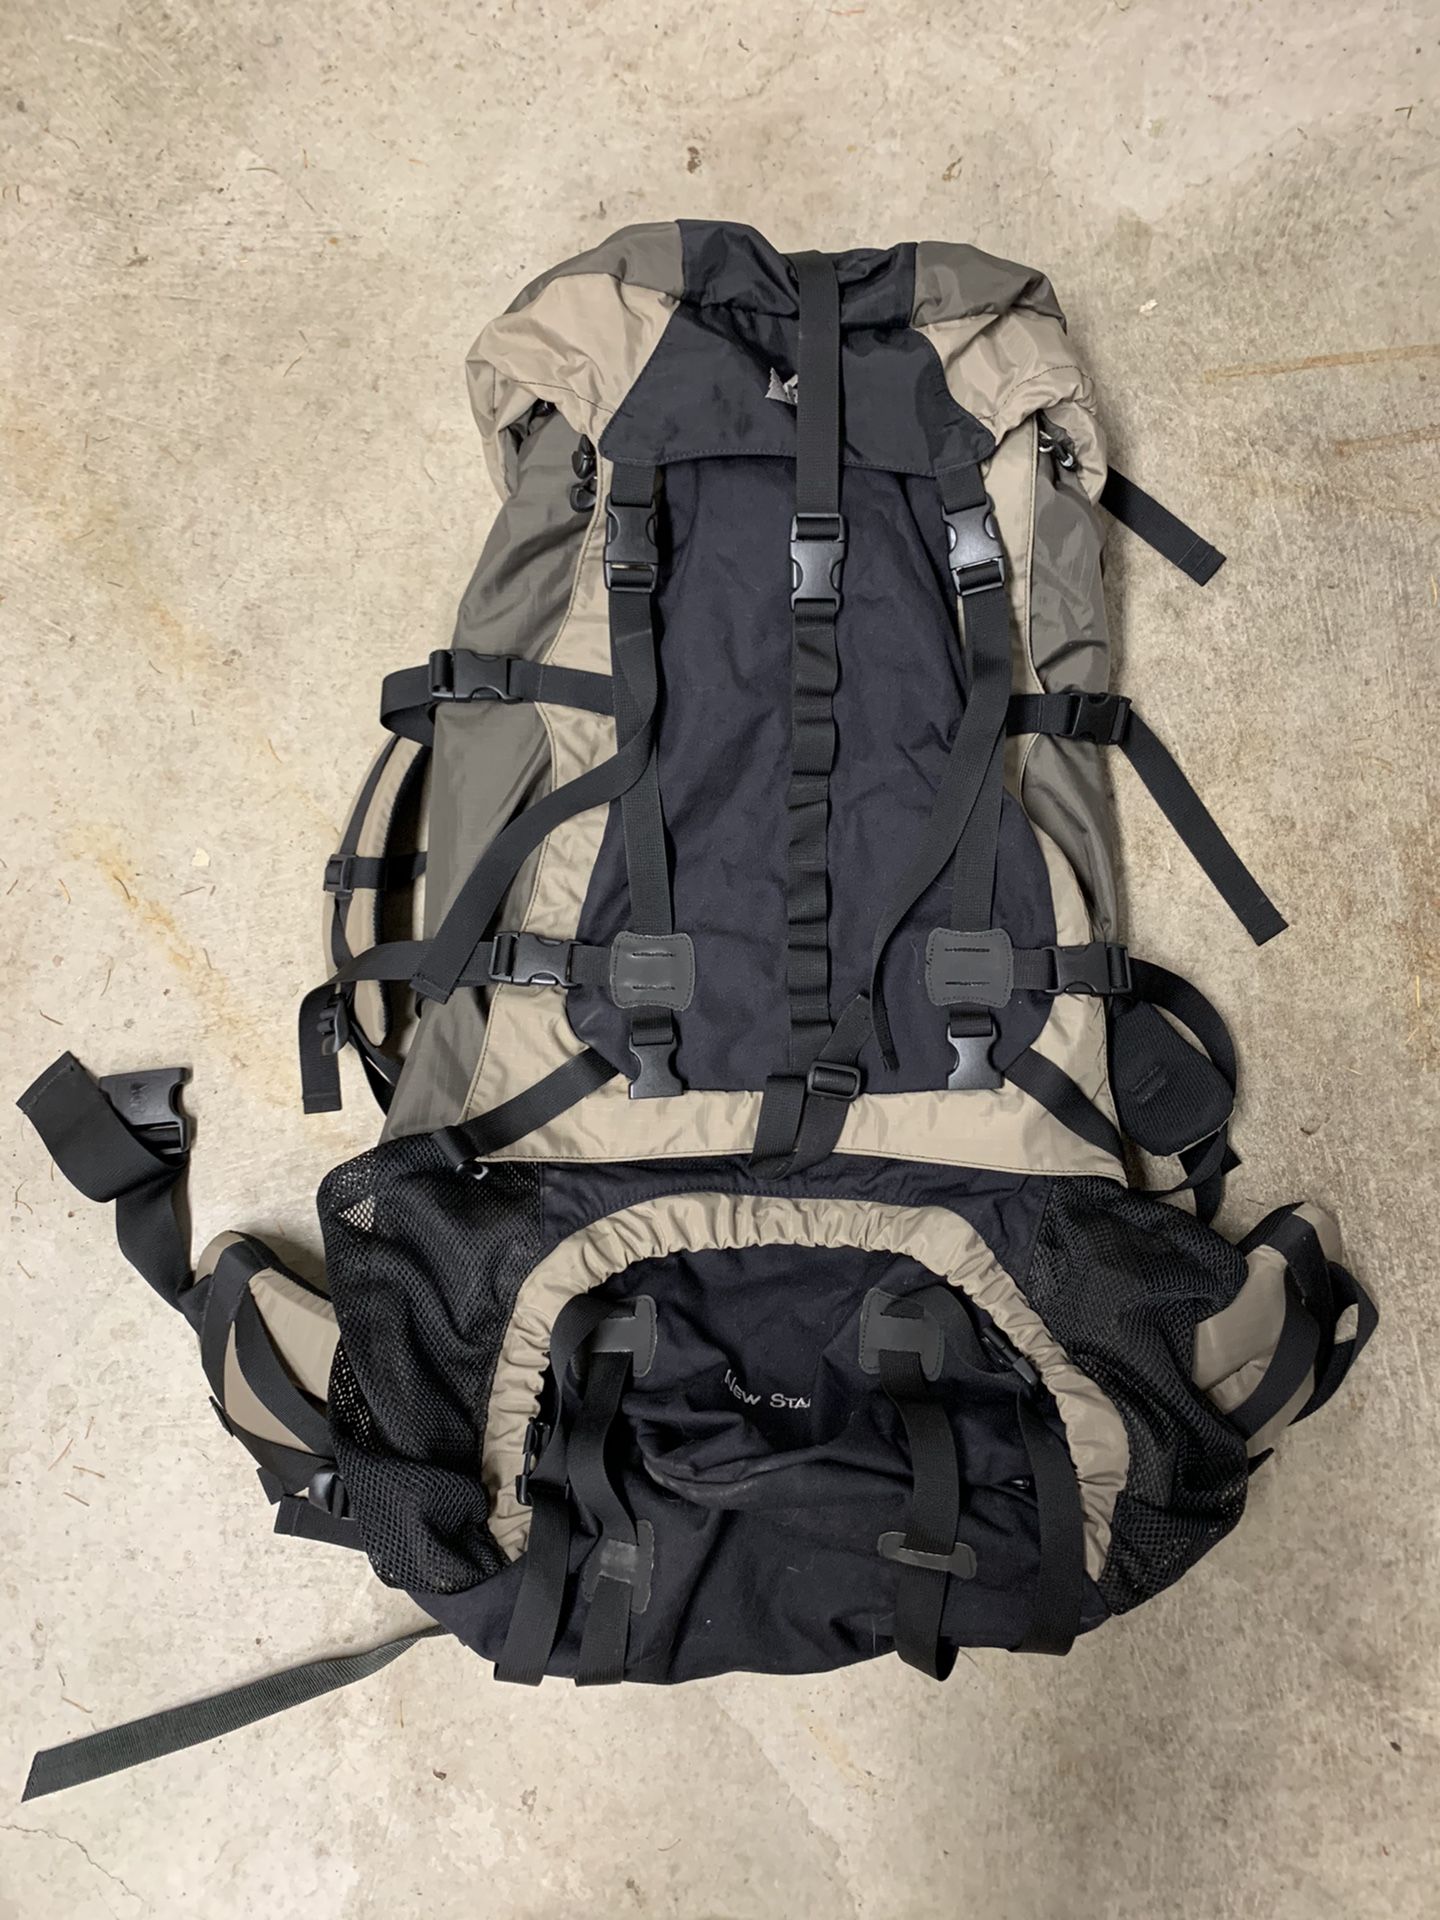 REI New Star Internal Frame Backpack - Size Large